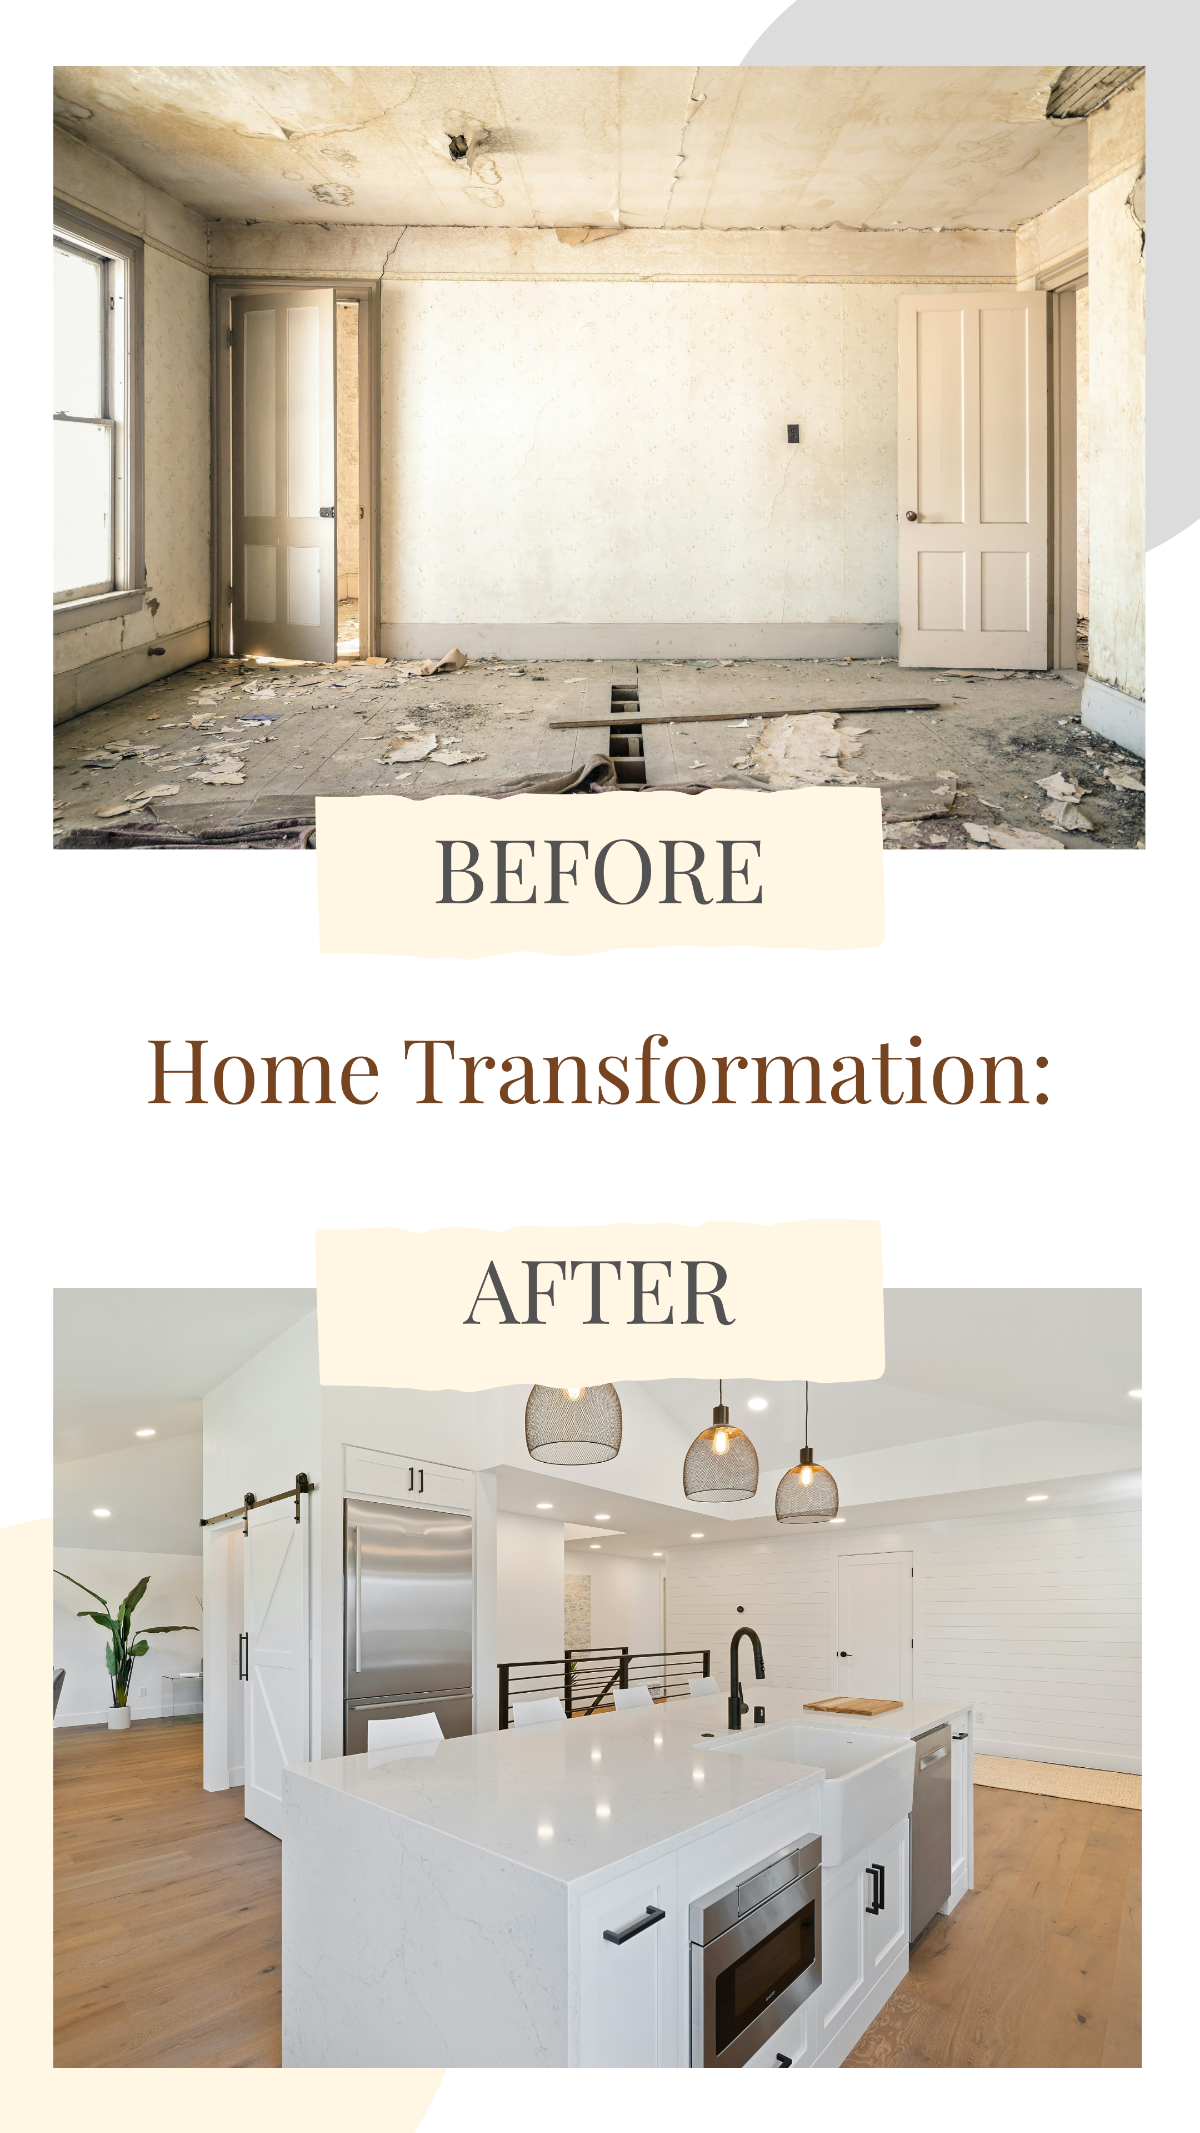 Before and After Home Transformation Story